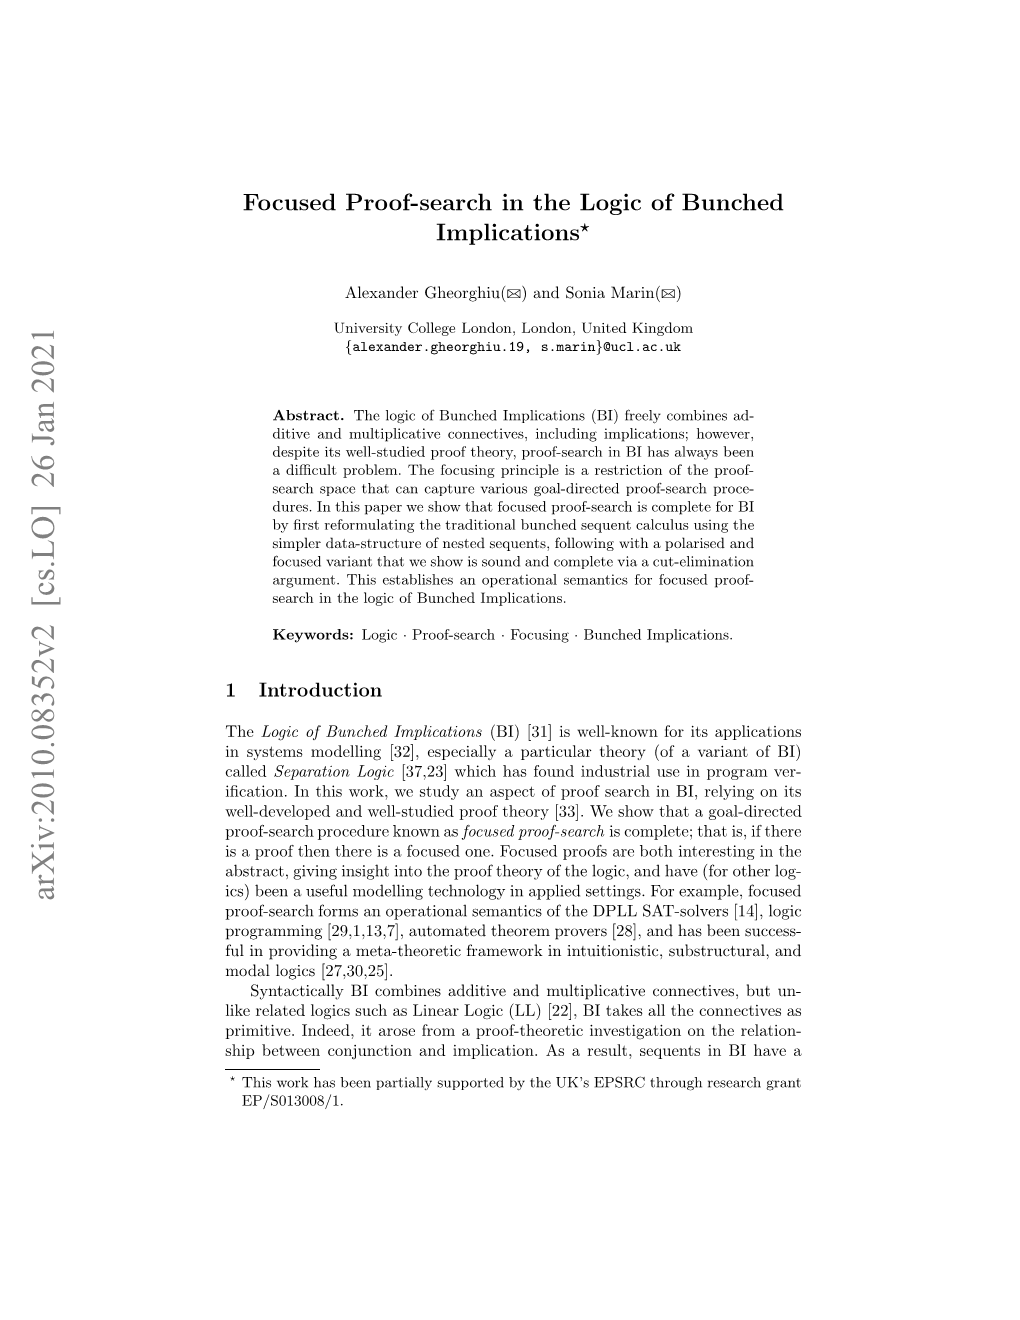 Focused Proof-Search in the Logic of Bunched Implications 3 Must Be Made: to Eliminate/Constrain These Rules, Or to Permit Them Without Restriction